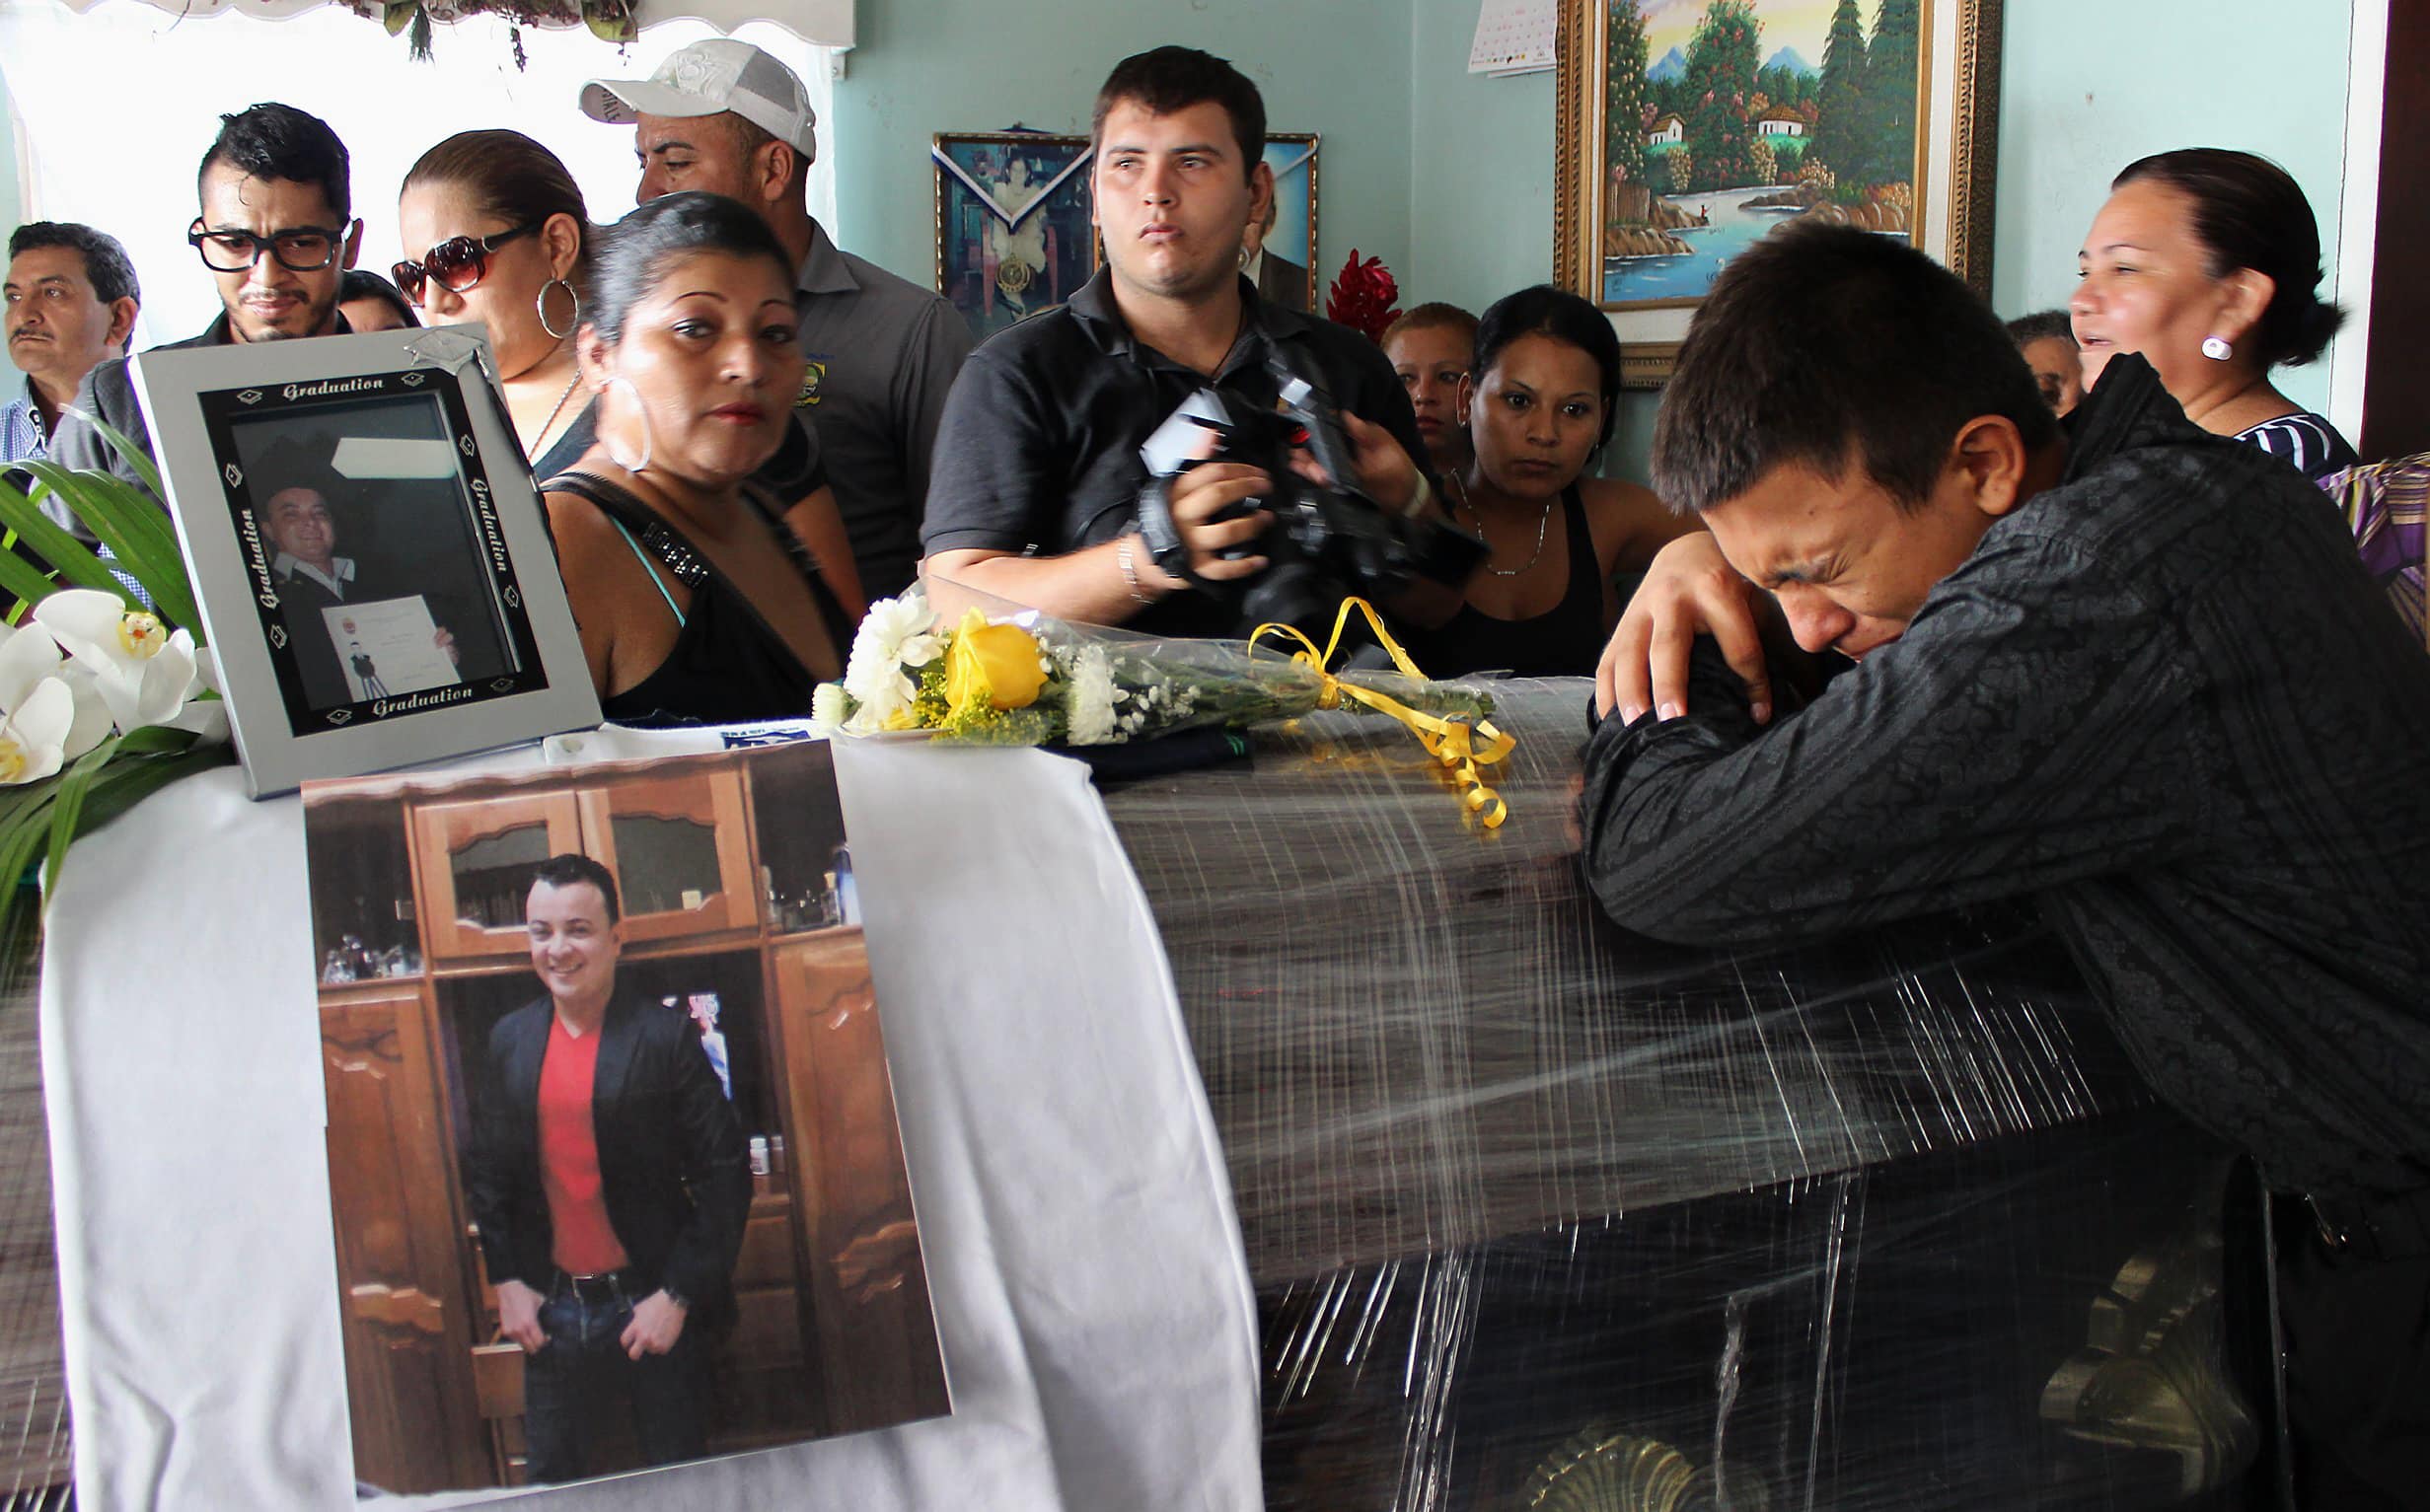 A relative of slain television journalist Herlyn Espinal mourns over his coffin during a wake at his home in Santa Rita municipality, in the outskirts of San Pedro Sula July 22, 2014. , REUTERS/Stringer